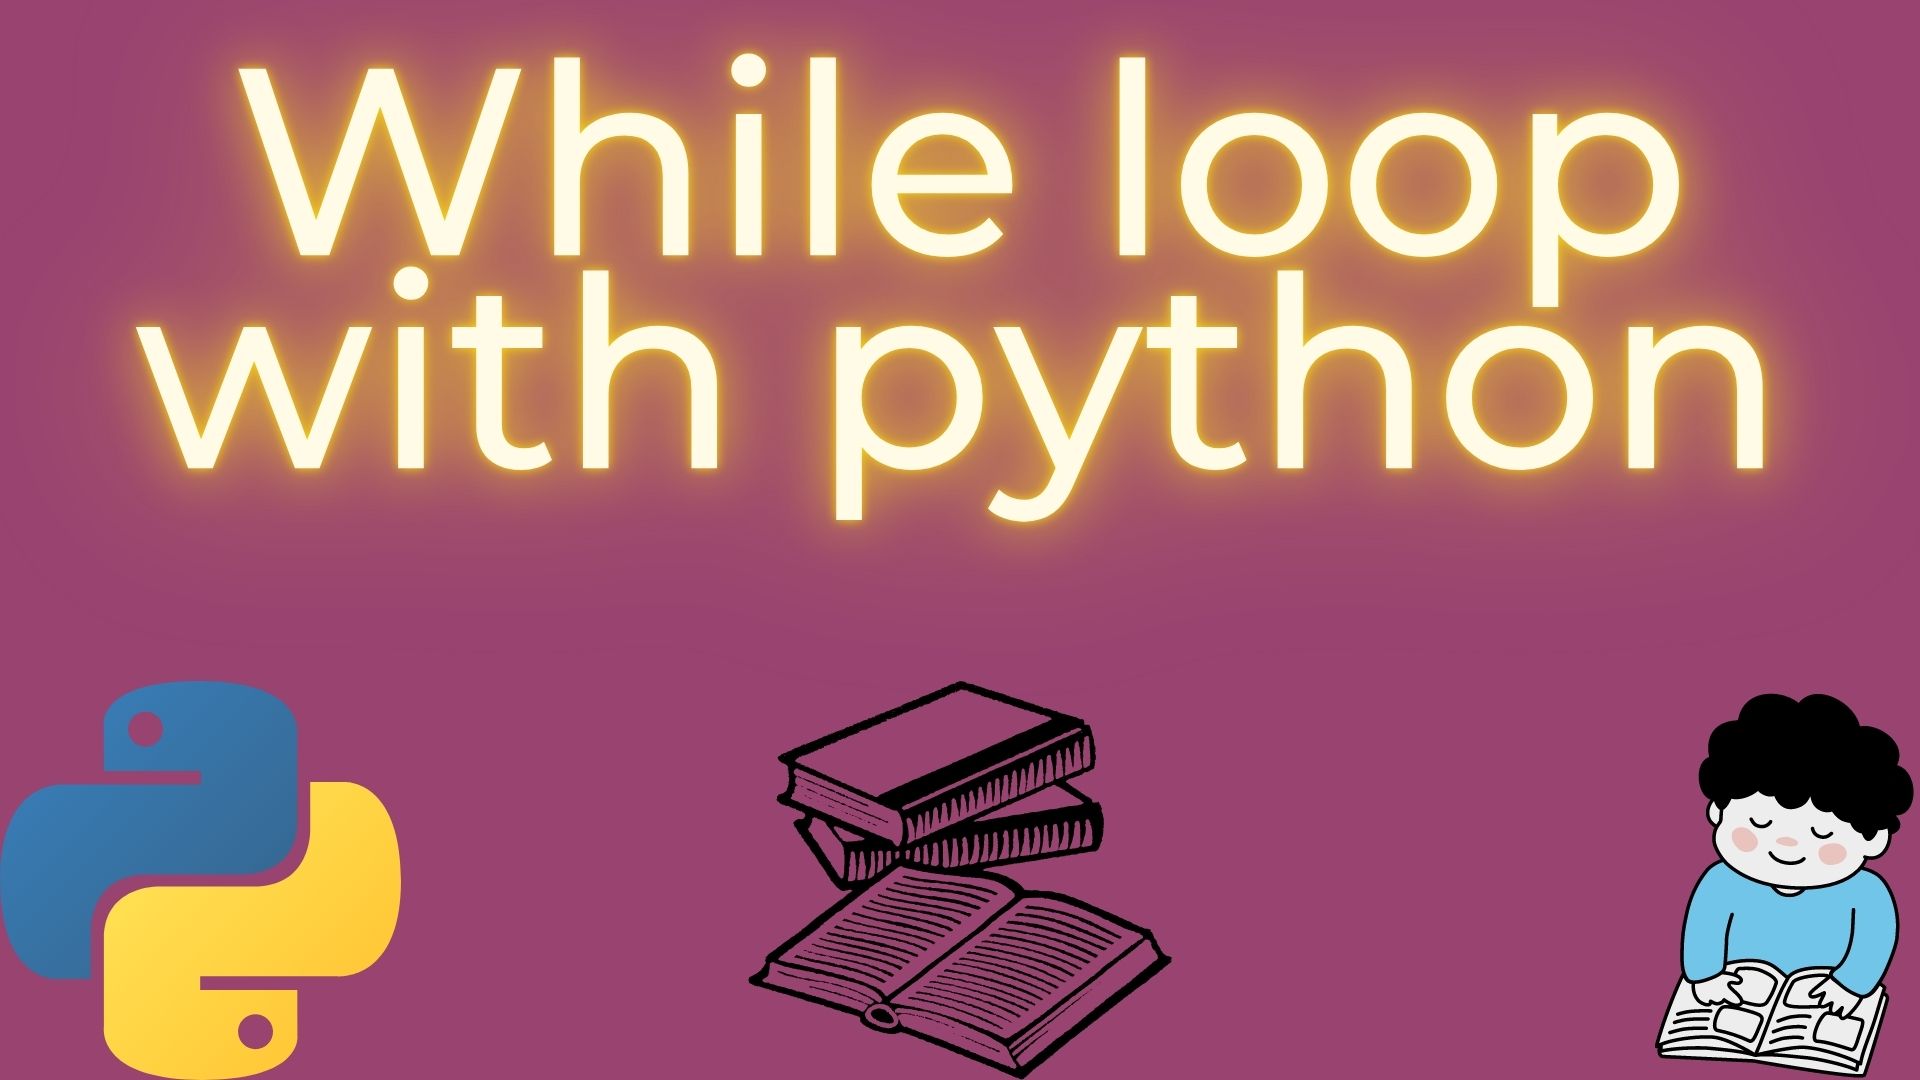 Image for introduction to python